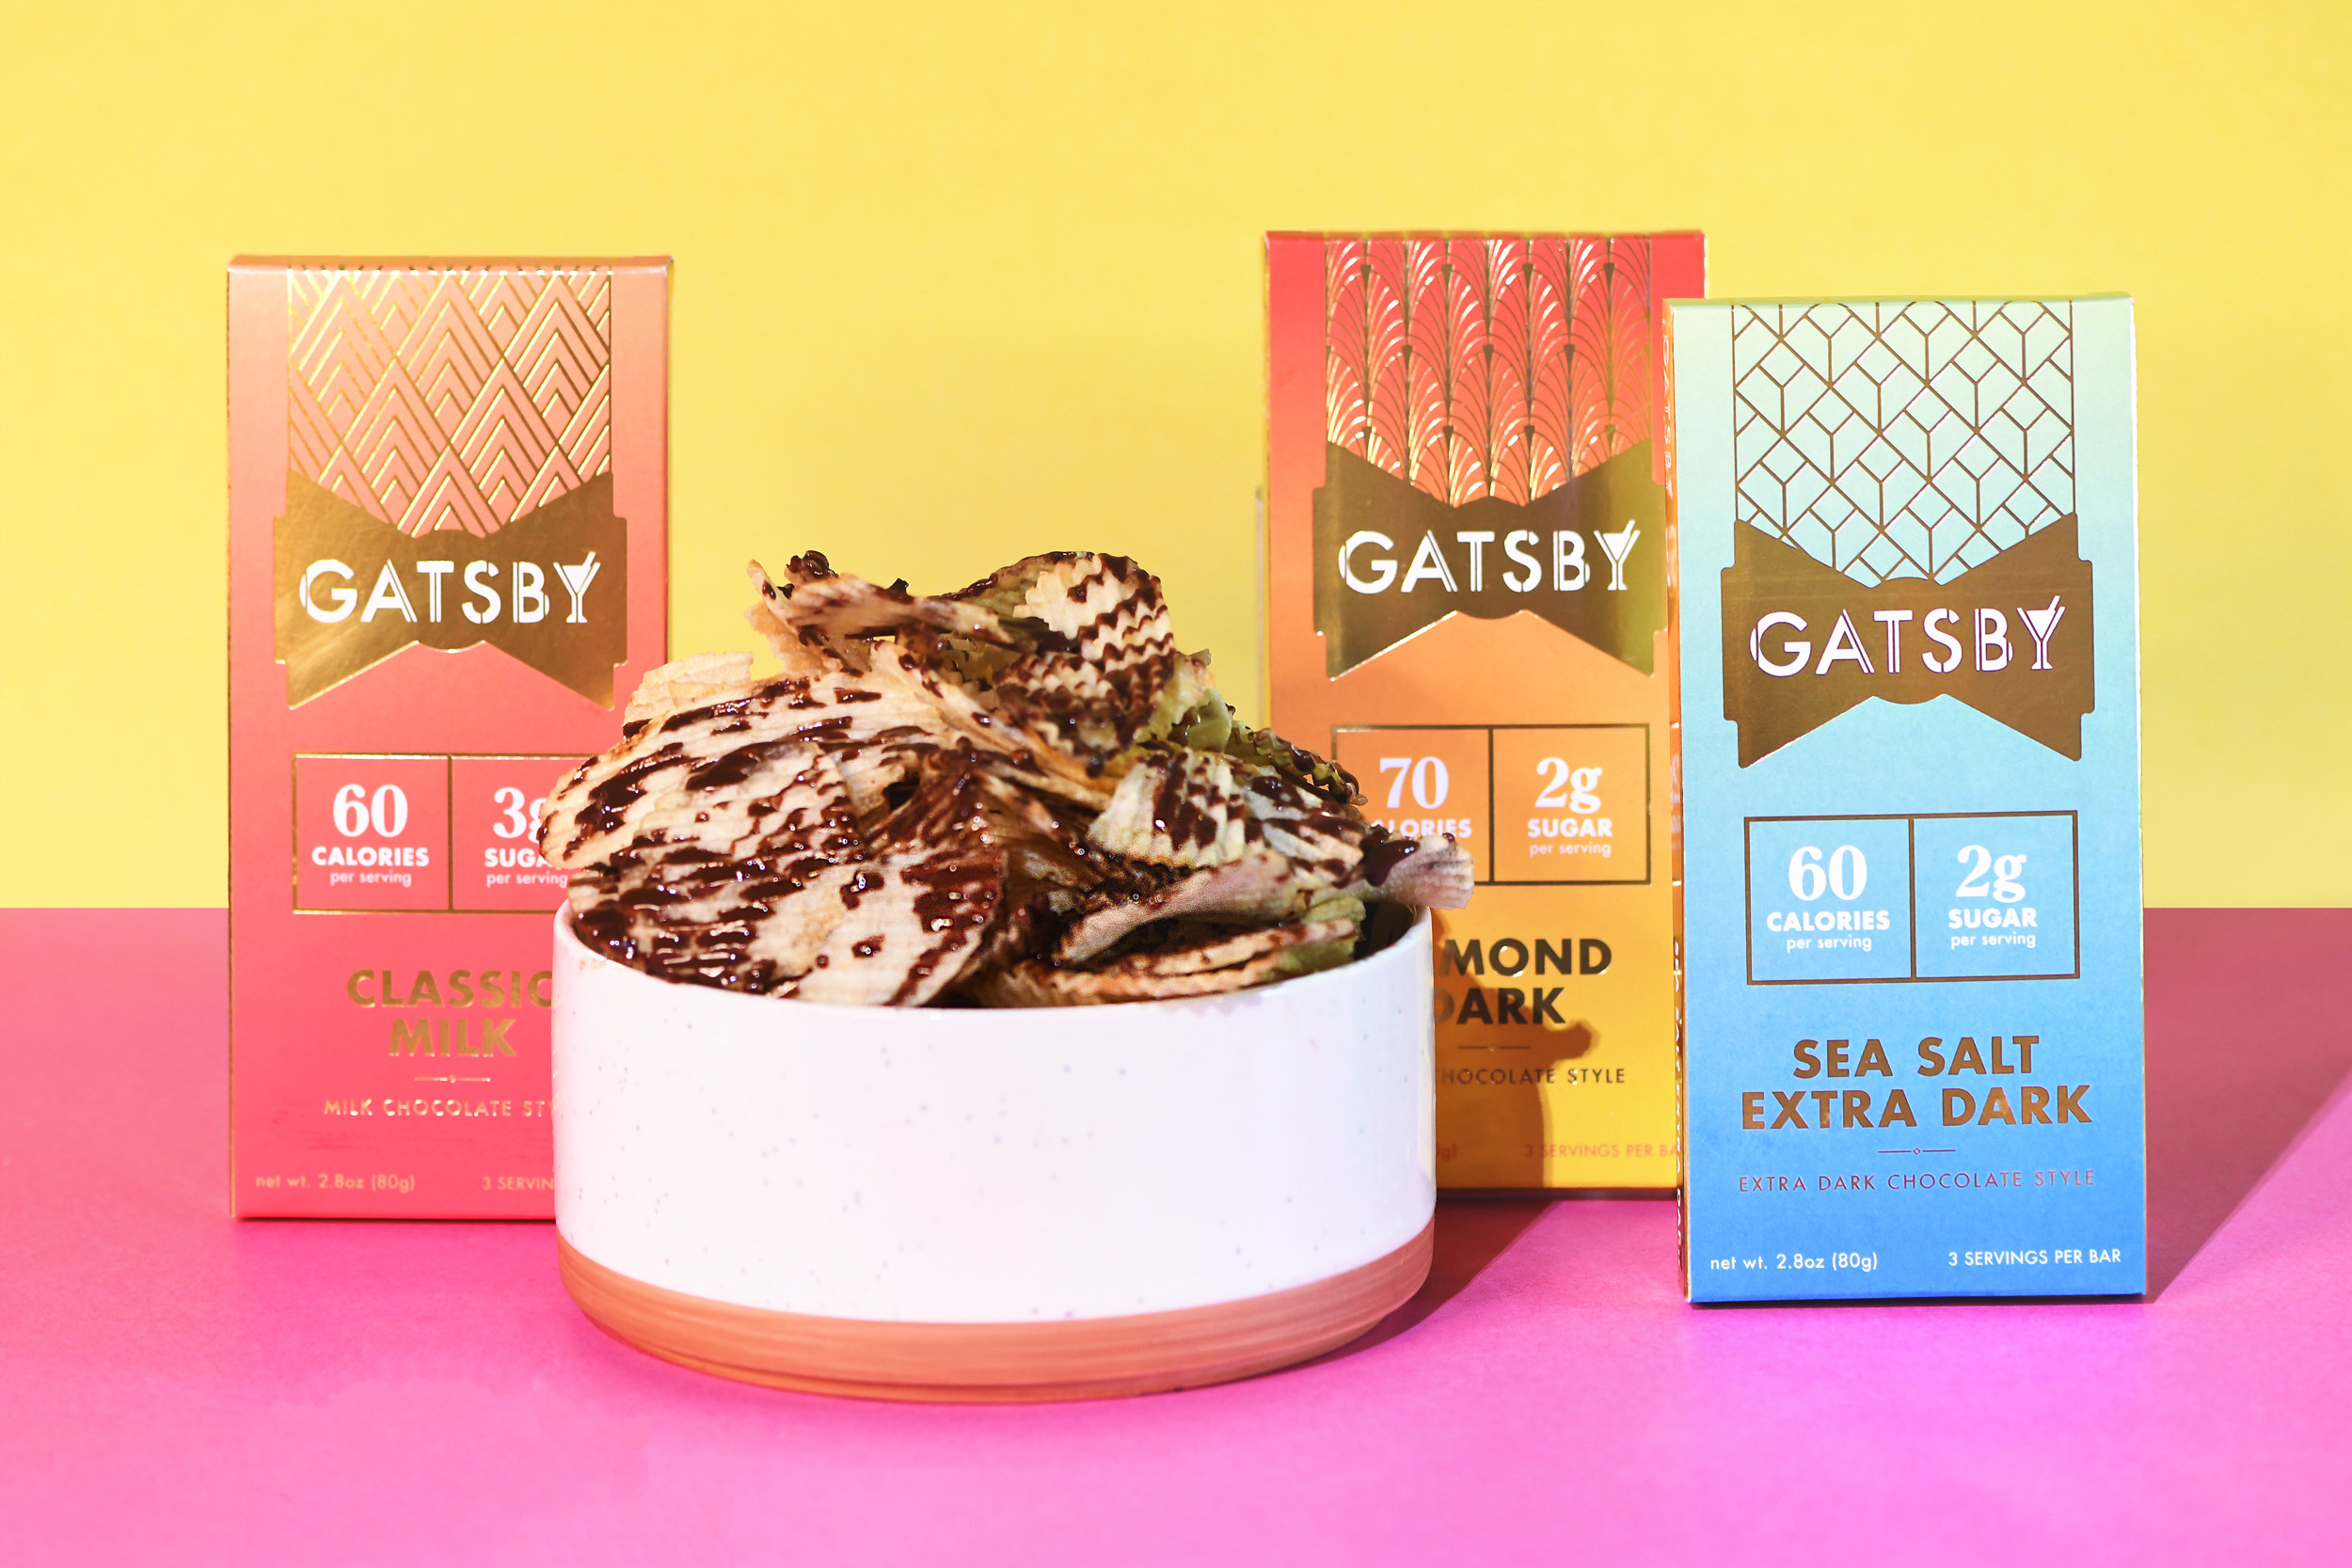 The Almond Dark, Classic Milk, and Sea Salt Extra Dark Gatsby bars next to a bowl of potato chips drizzled with chocolate